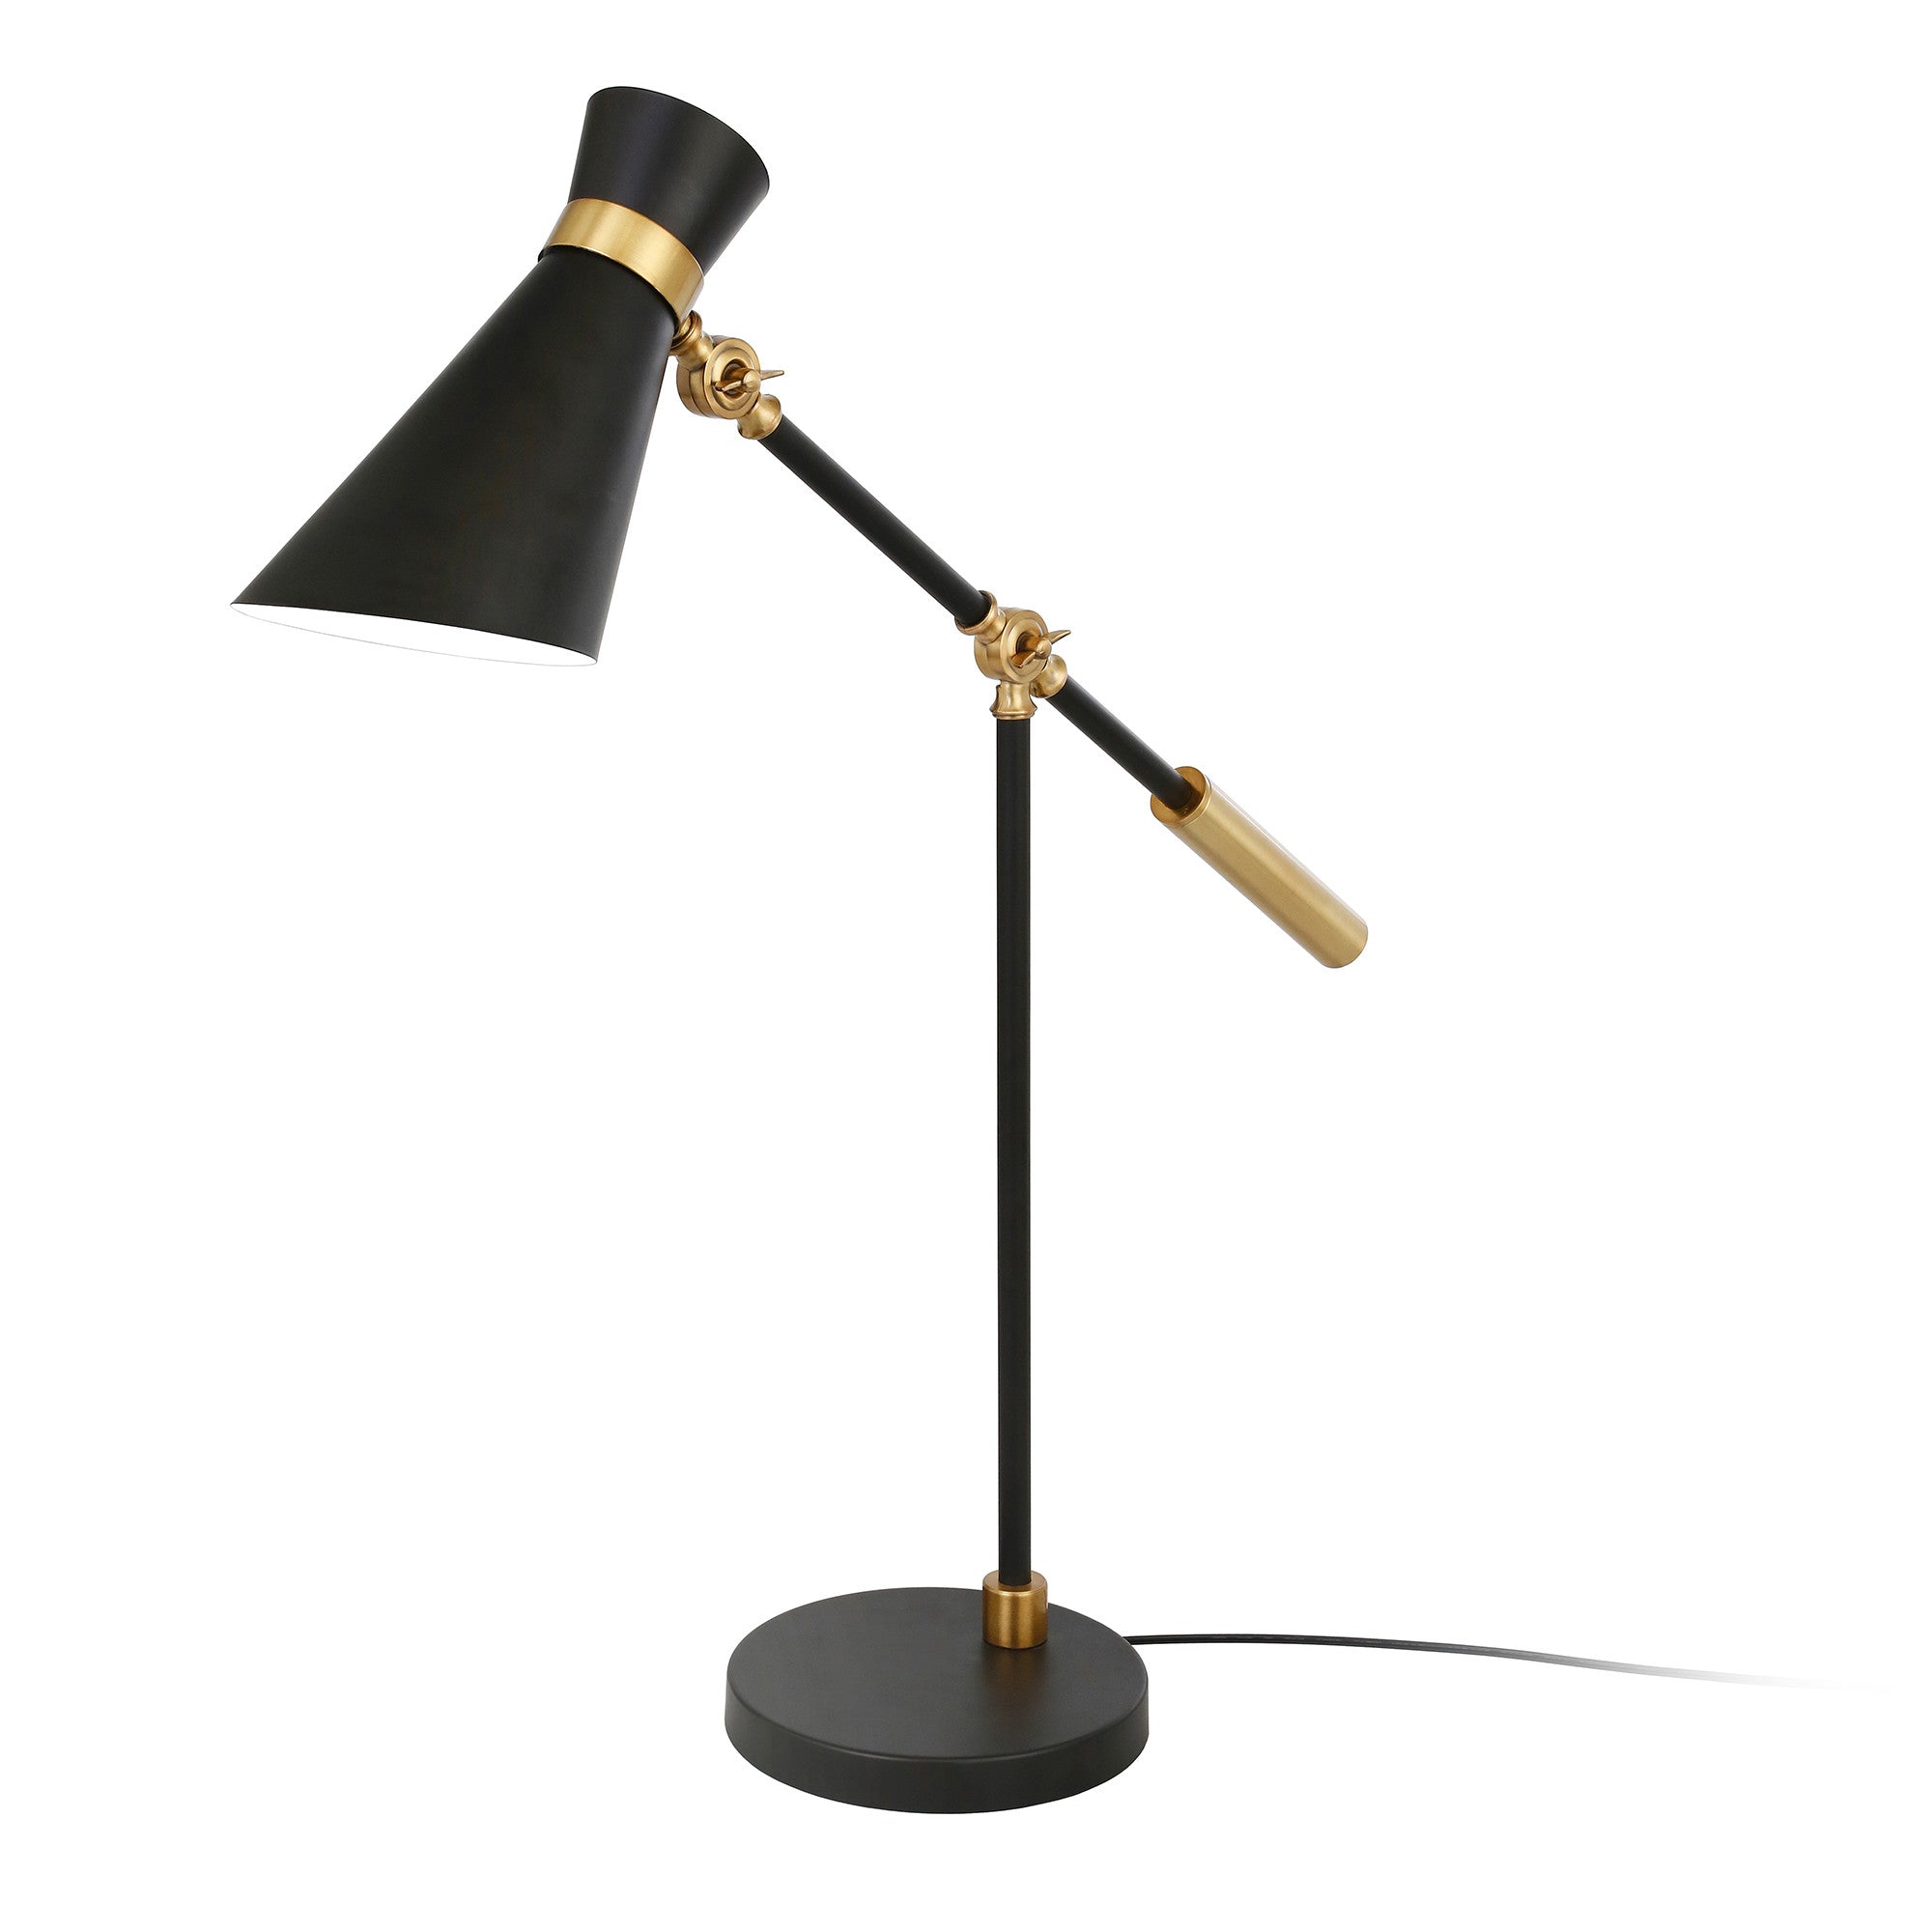 30" Black and Gold Metal Desk Table Lamp With Black Cone Shade